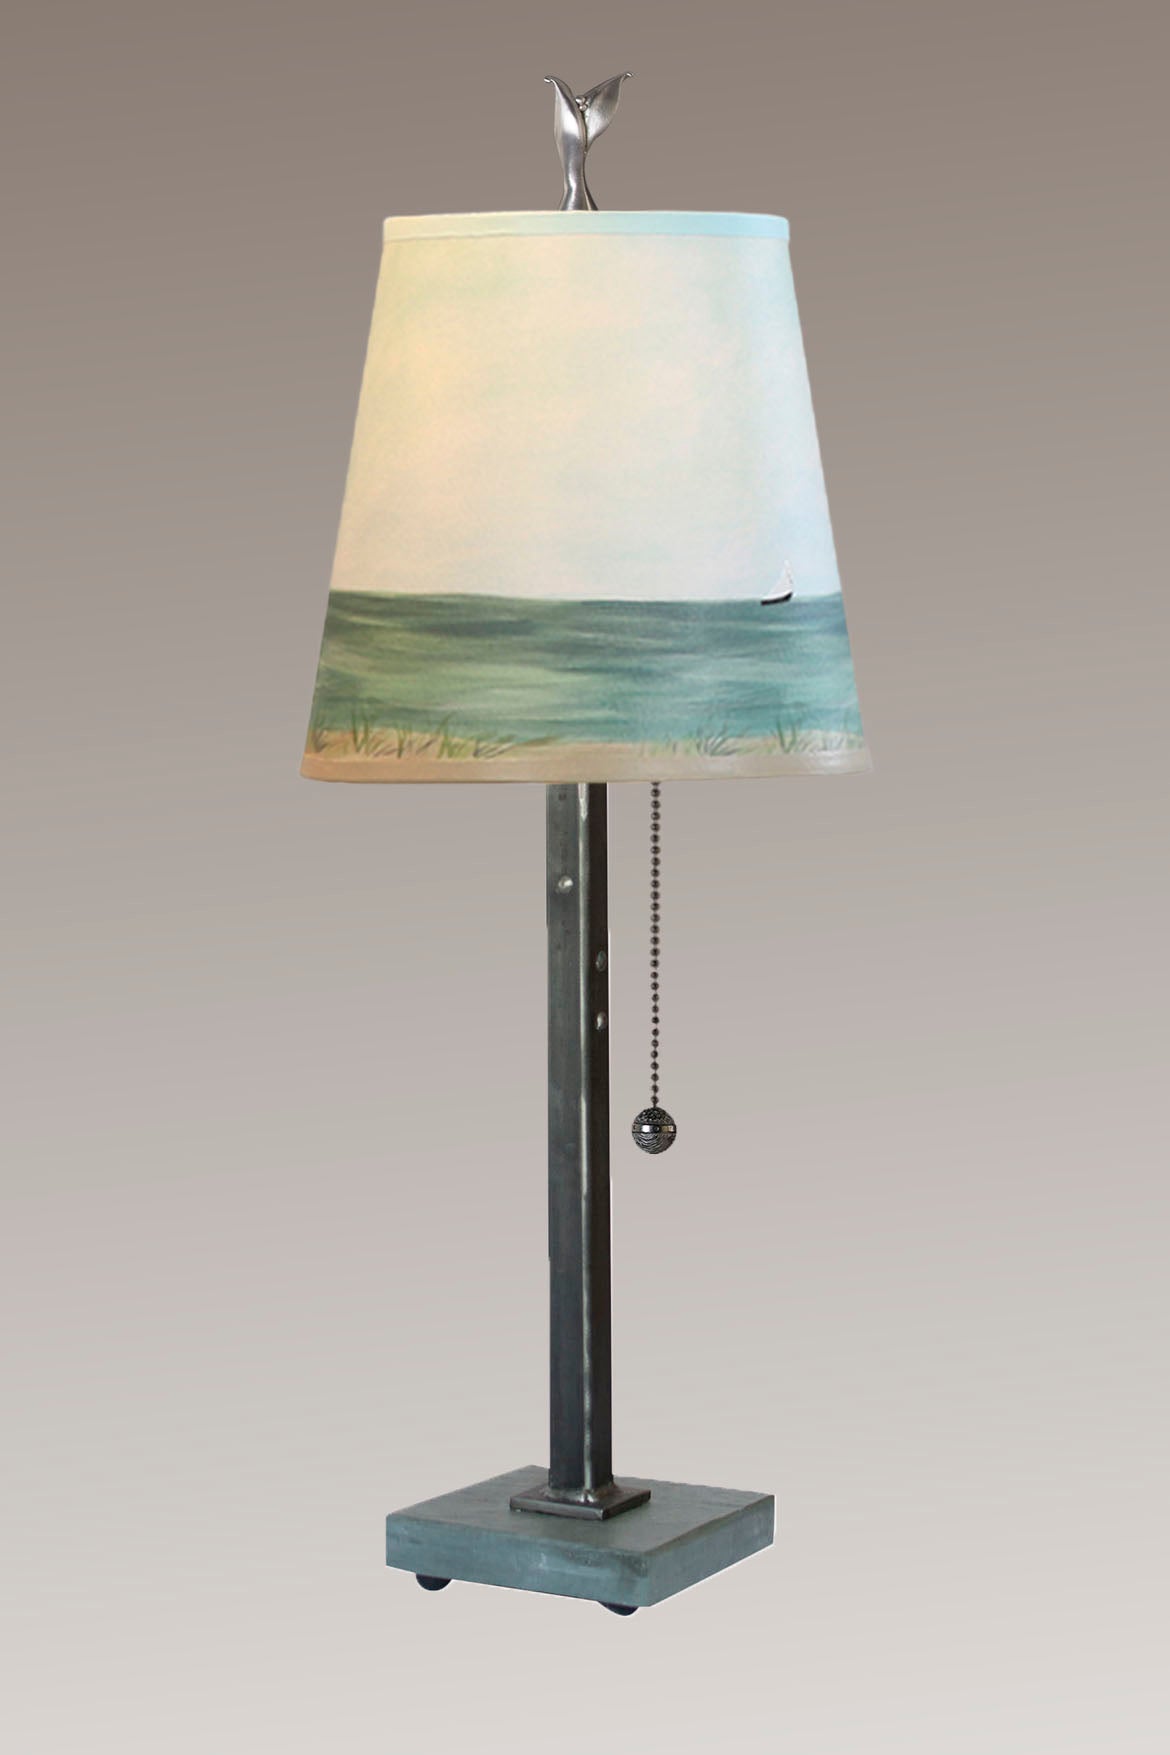 Janna Ugone & Co Table Lamps Steel Table Lamp with Small Drum Shade in Shore